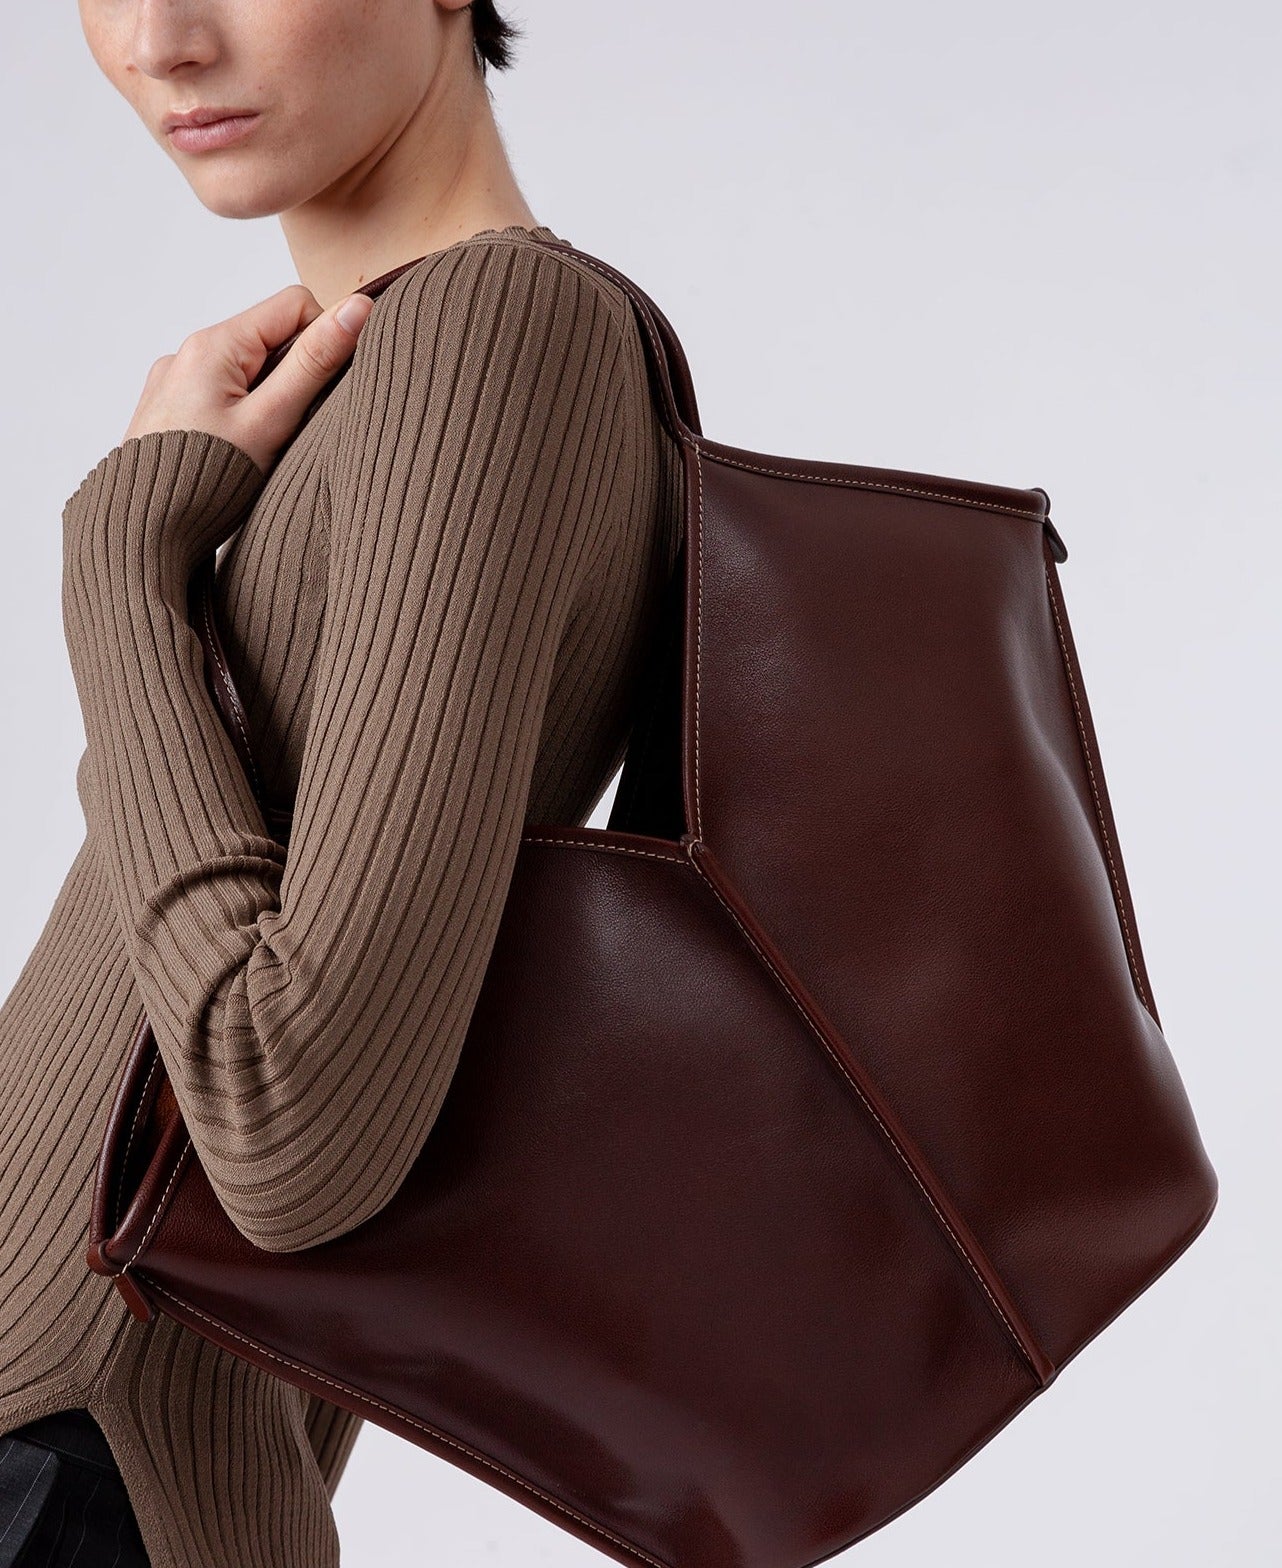 CALELLA LEATHER - Leather Tote Bag